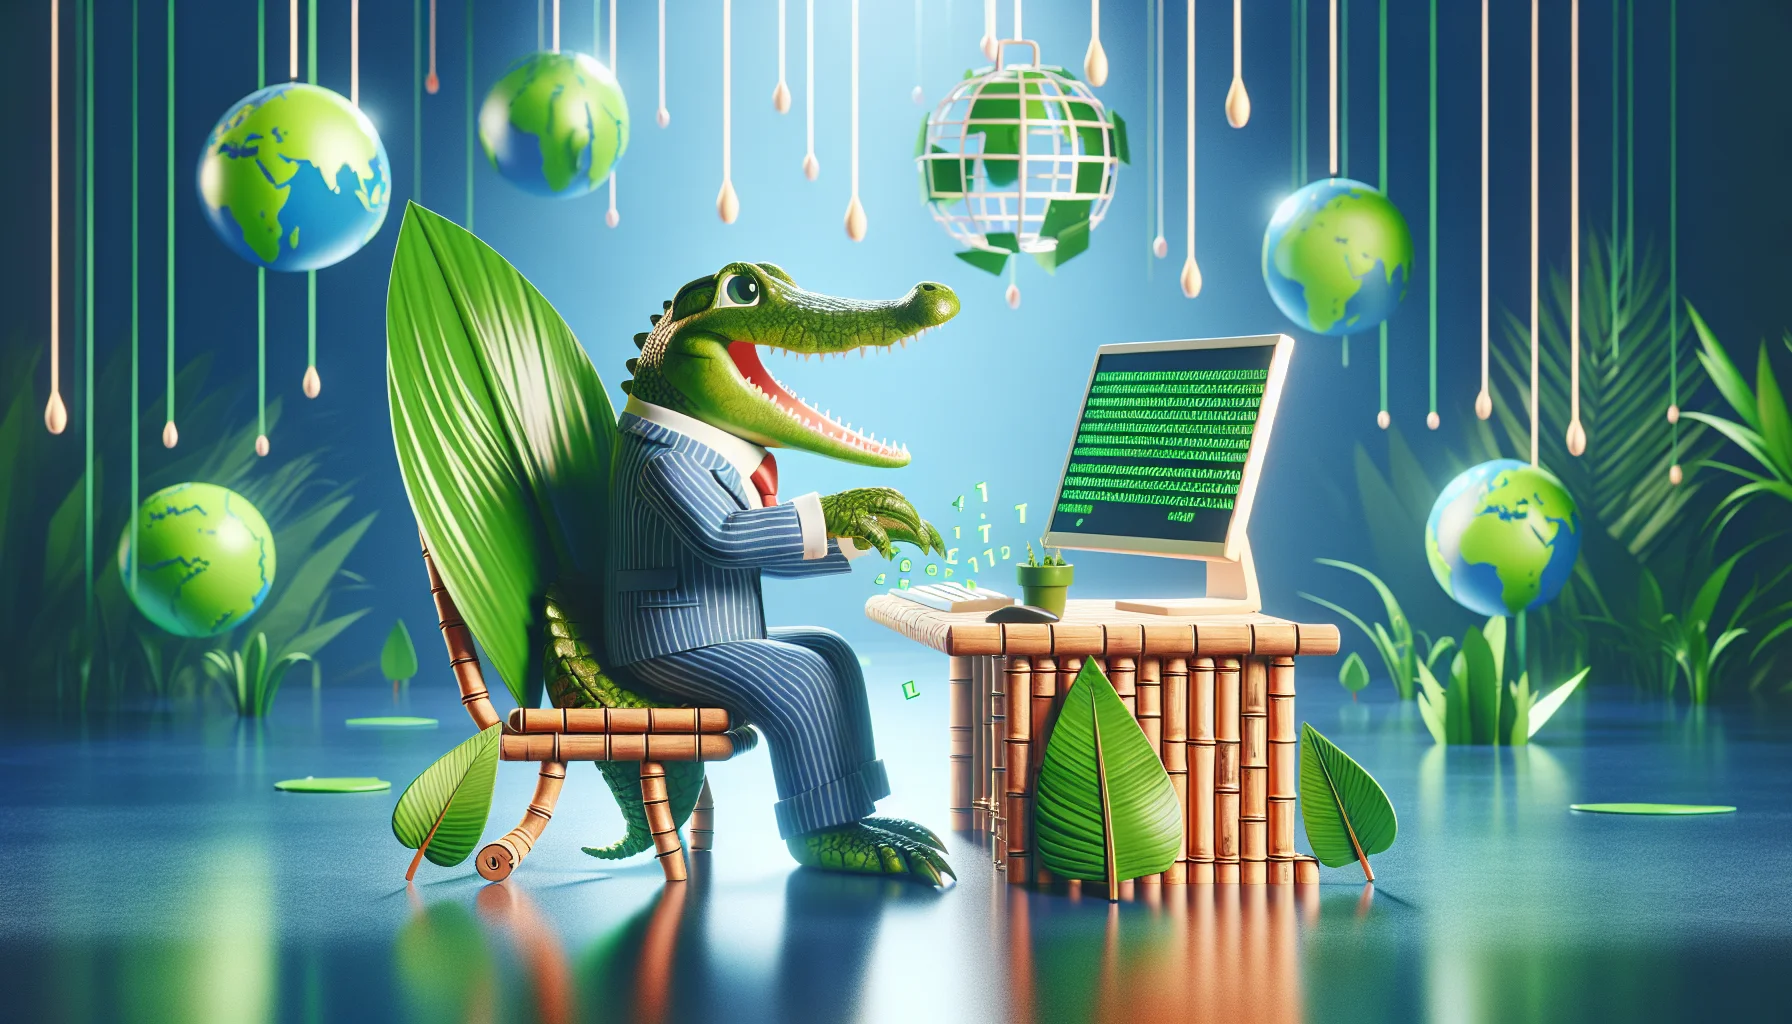 Compose a playful and attractive scenario featuring a playful crocodile, symbolizing an online website builder. This image should be set in the heart of a vibrant digital jungle, within a virtual office made from tropical foliage. The crocodile is sitting at a bright bamboo desk, wearing a business suit, and typing enthusiastically on a leaf-shaped keyboard - a subtle nod to eco-friendliness. The computer screen is showing lines of green binary coding forming the outline of a website. In the background, rotating 3D models of globes and websites are floating around, representing various available web hosting services.